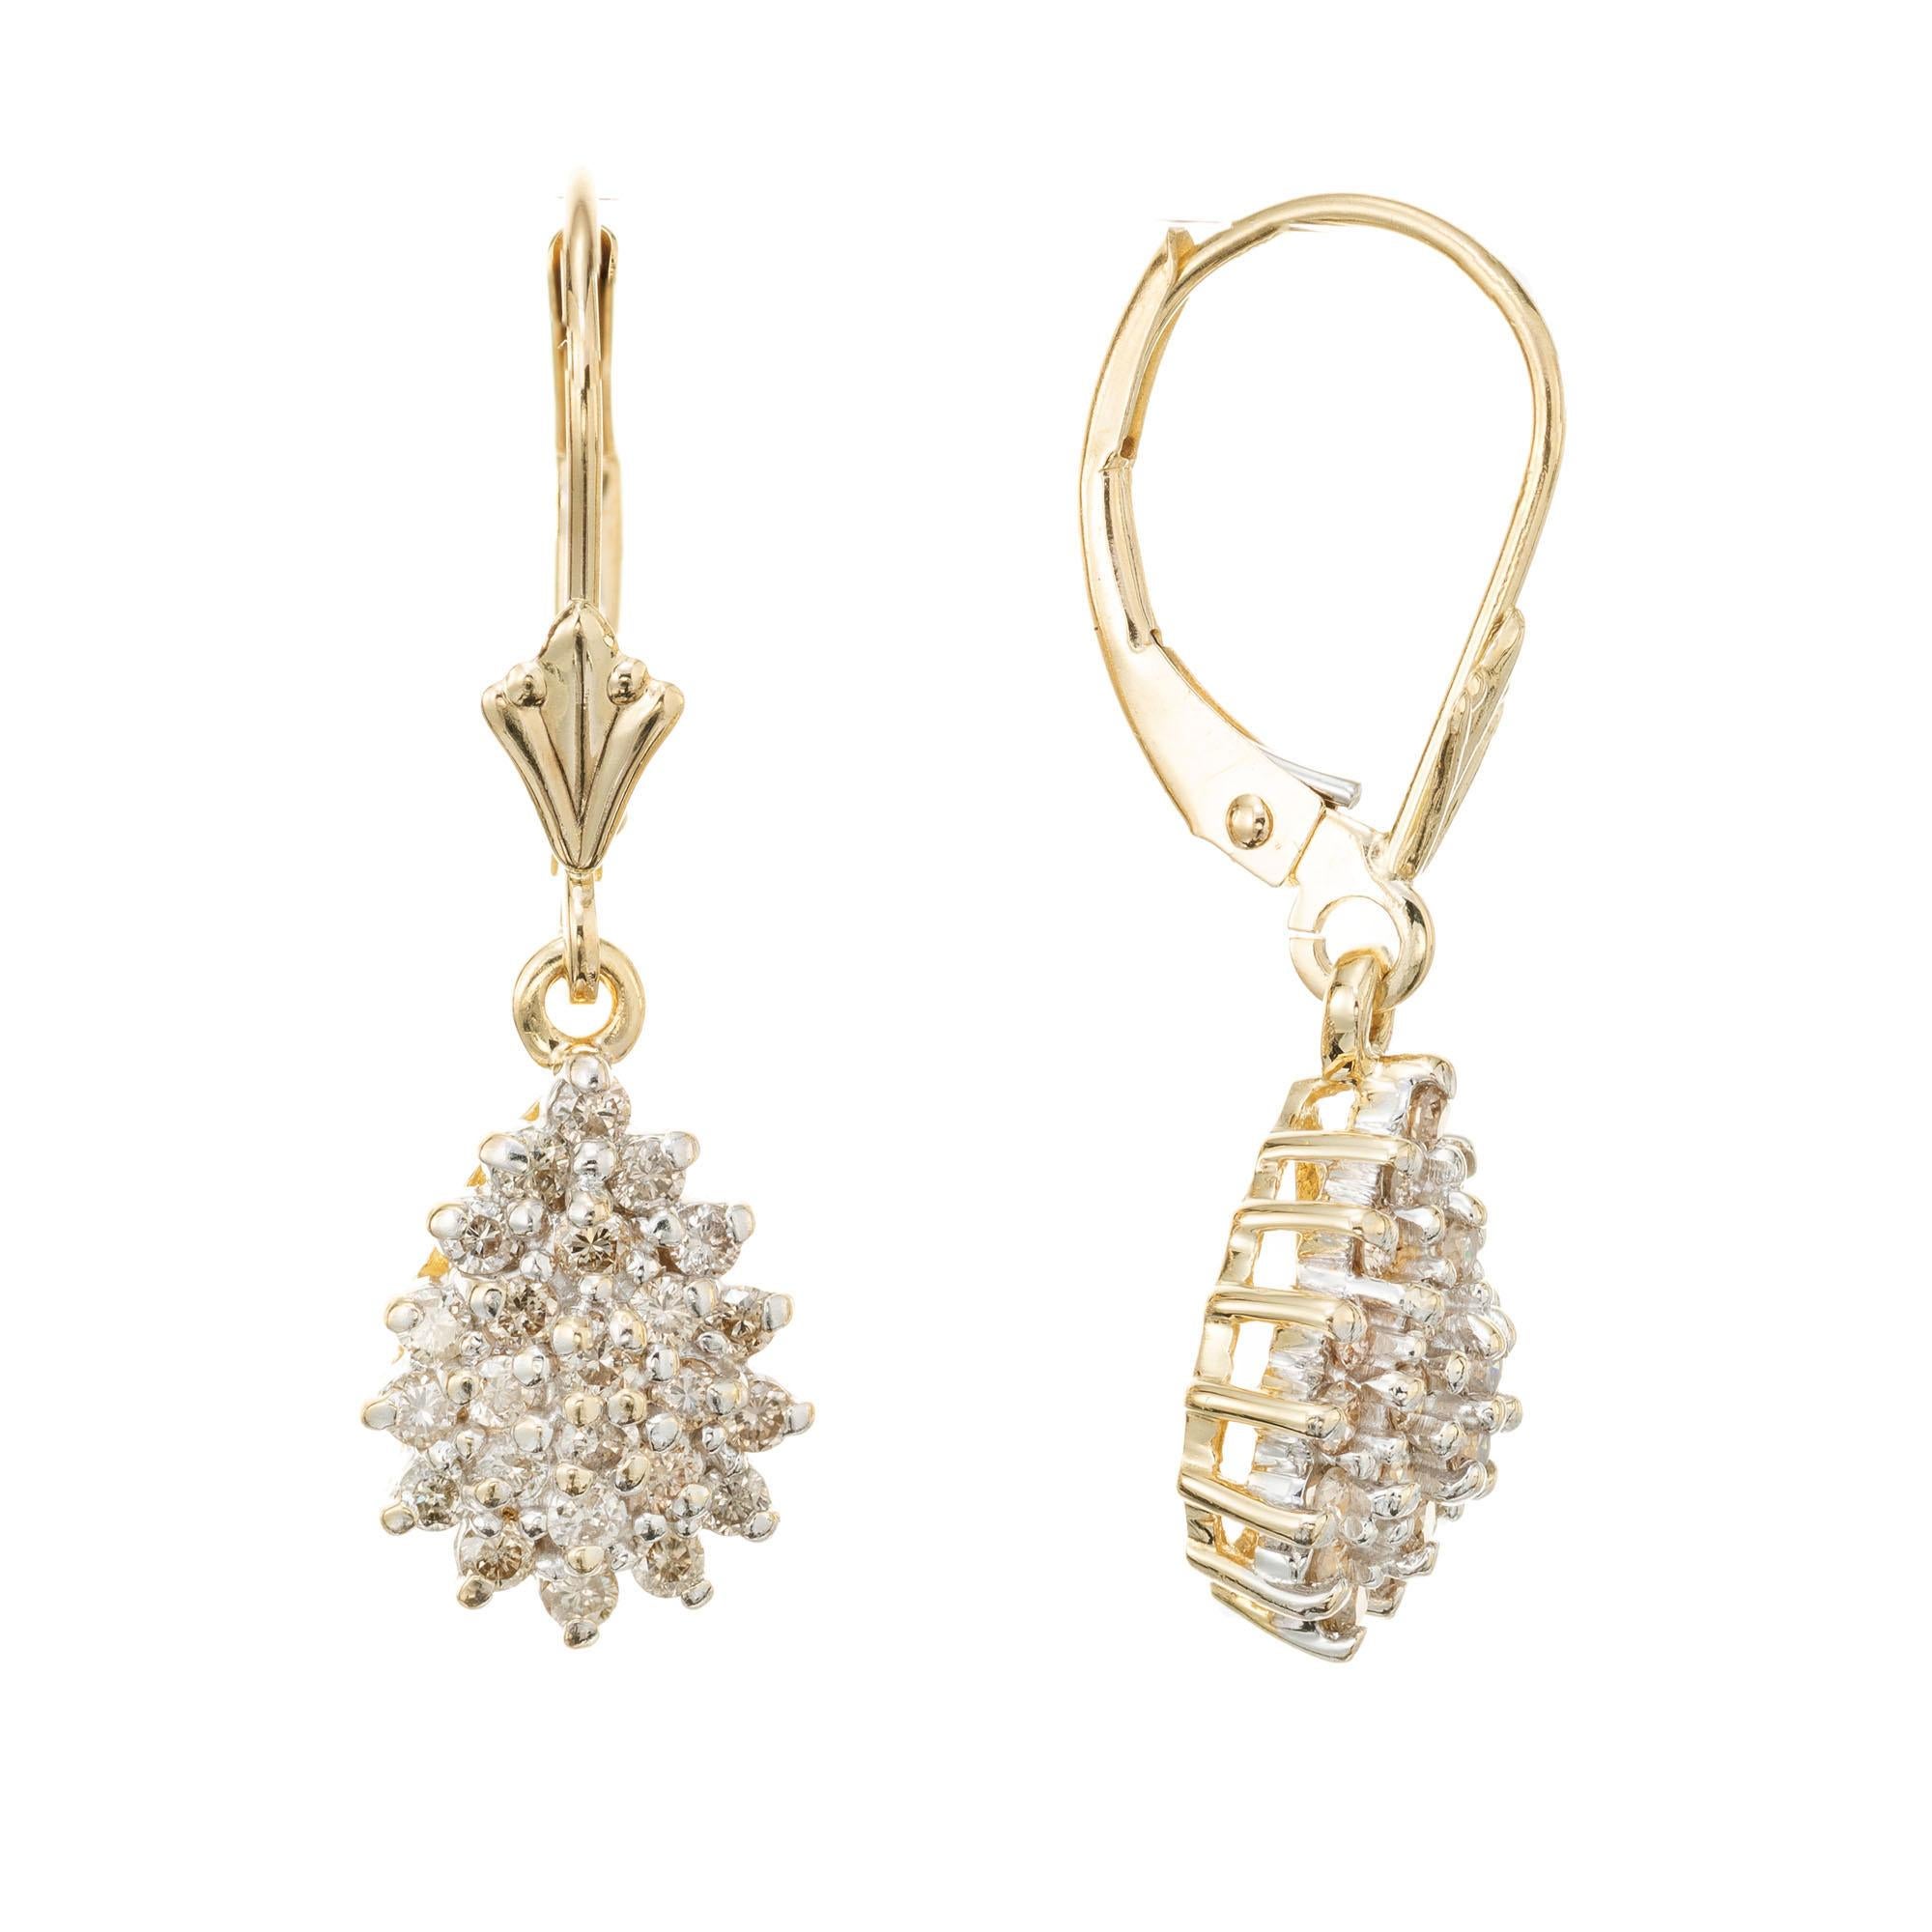 Dangle earrings in 14k yellow gold with domed pear shape clusters set with 48 round brilliant cut light brown tinted diamonds.

48 round brilliant cut diamonds, K-M VS-SI approx. .48cts
14k yellow gold 
Stamped: 14k
2.8 grams
Top to bottom: 2.7mm or